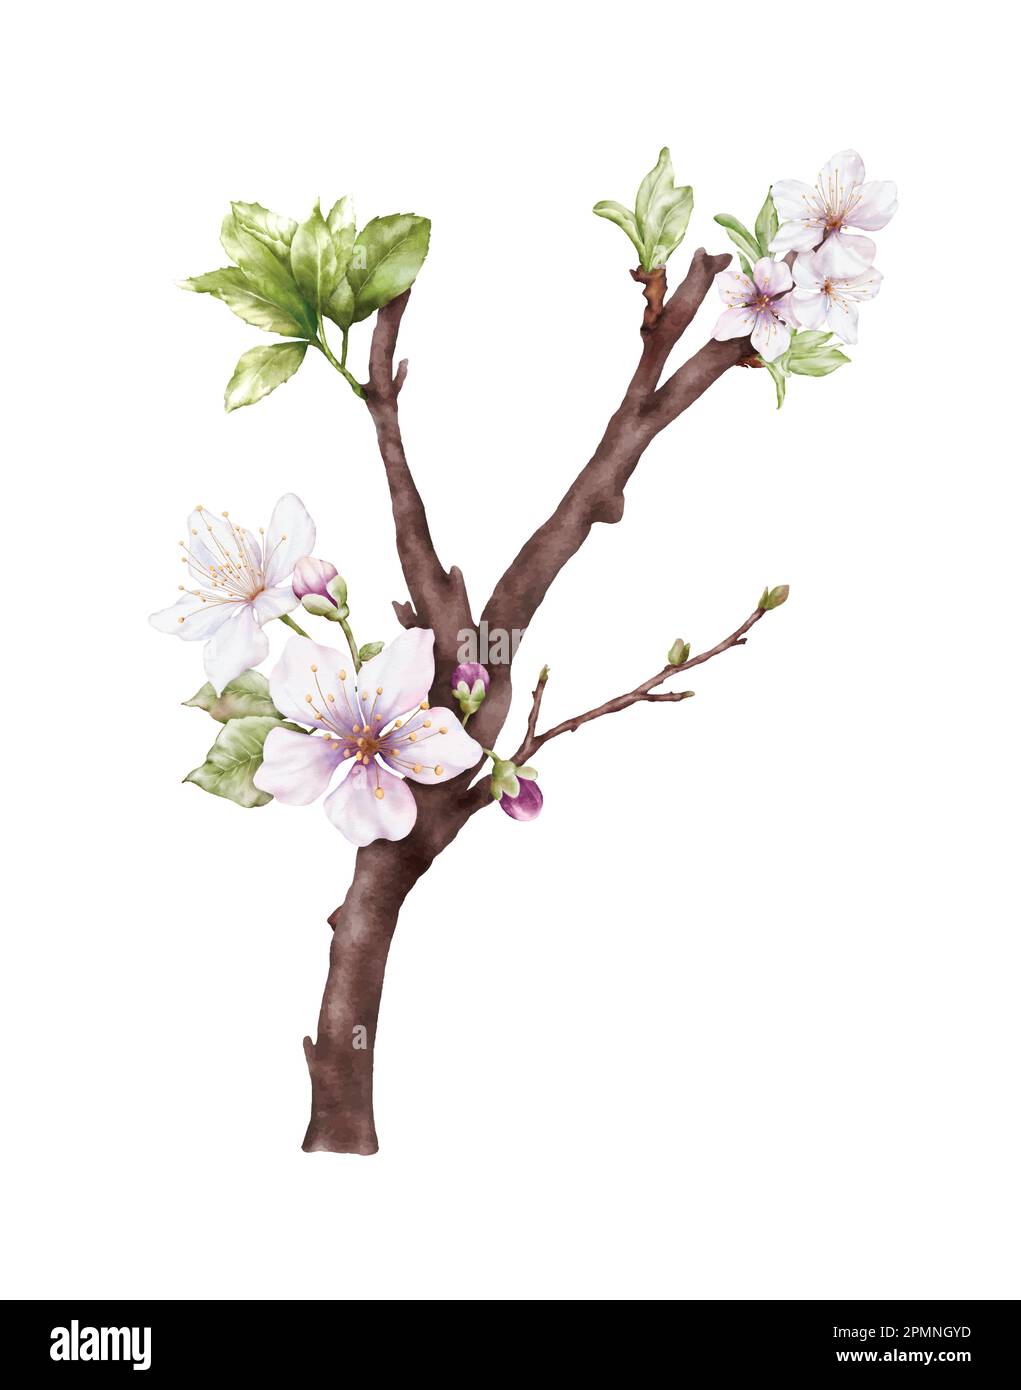 Watercolor light pink cherry blossoms blooming on the branches. Cherry blossom and leaves branch bouquet vector isolated on white background. Suitable Stock Vector